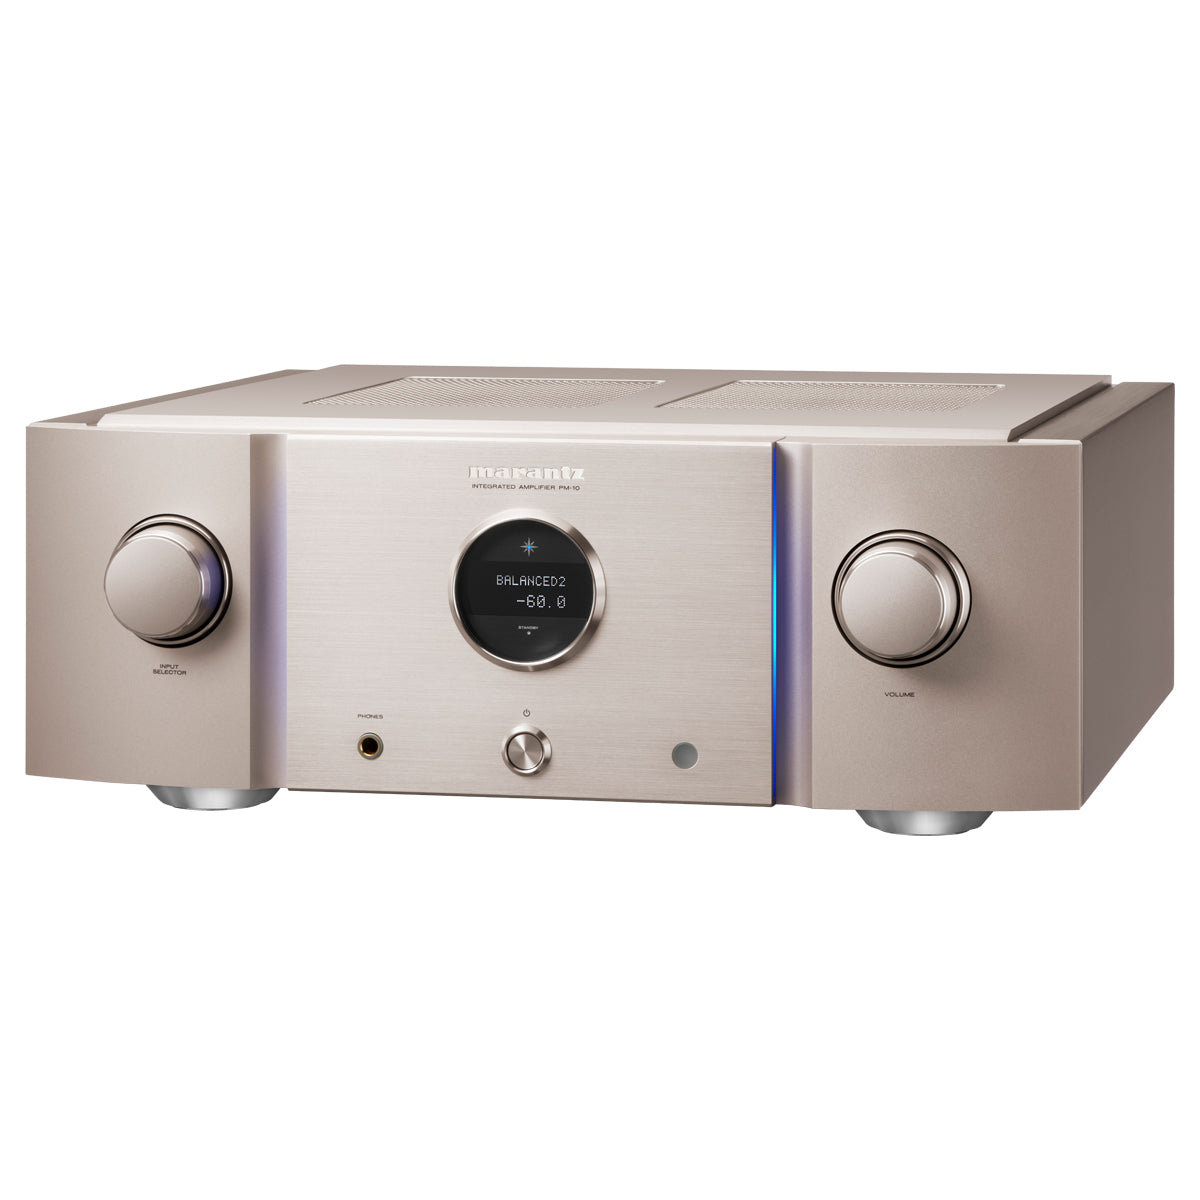 Marantz PM-10S1 Stereo Amplifier - Gold | Made In Japan - The Audio Experts